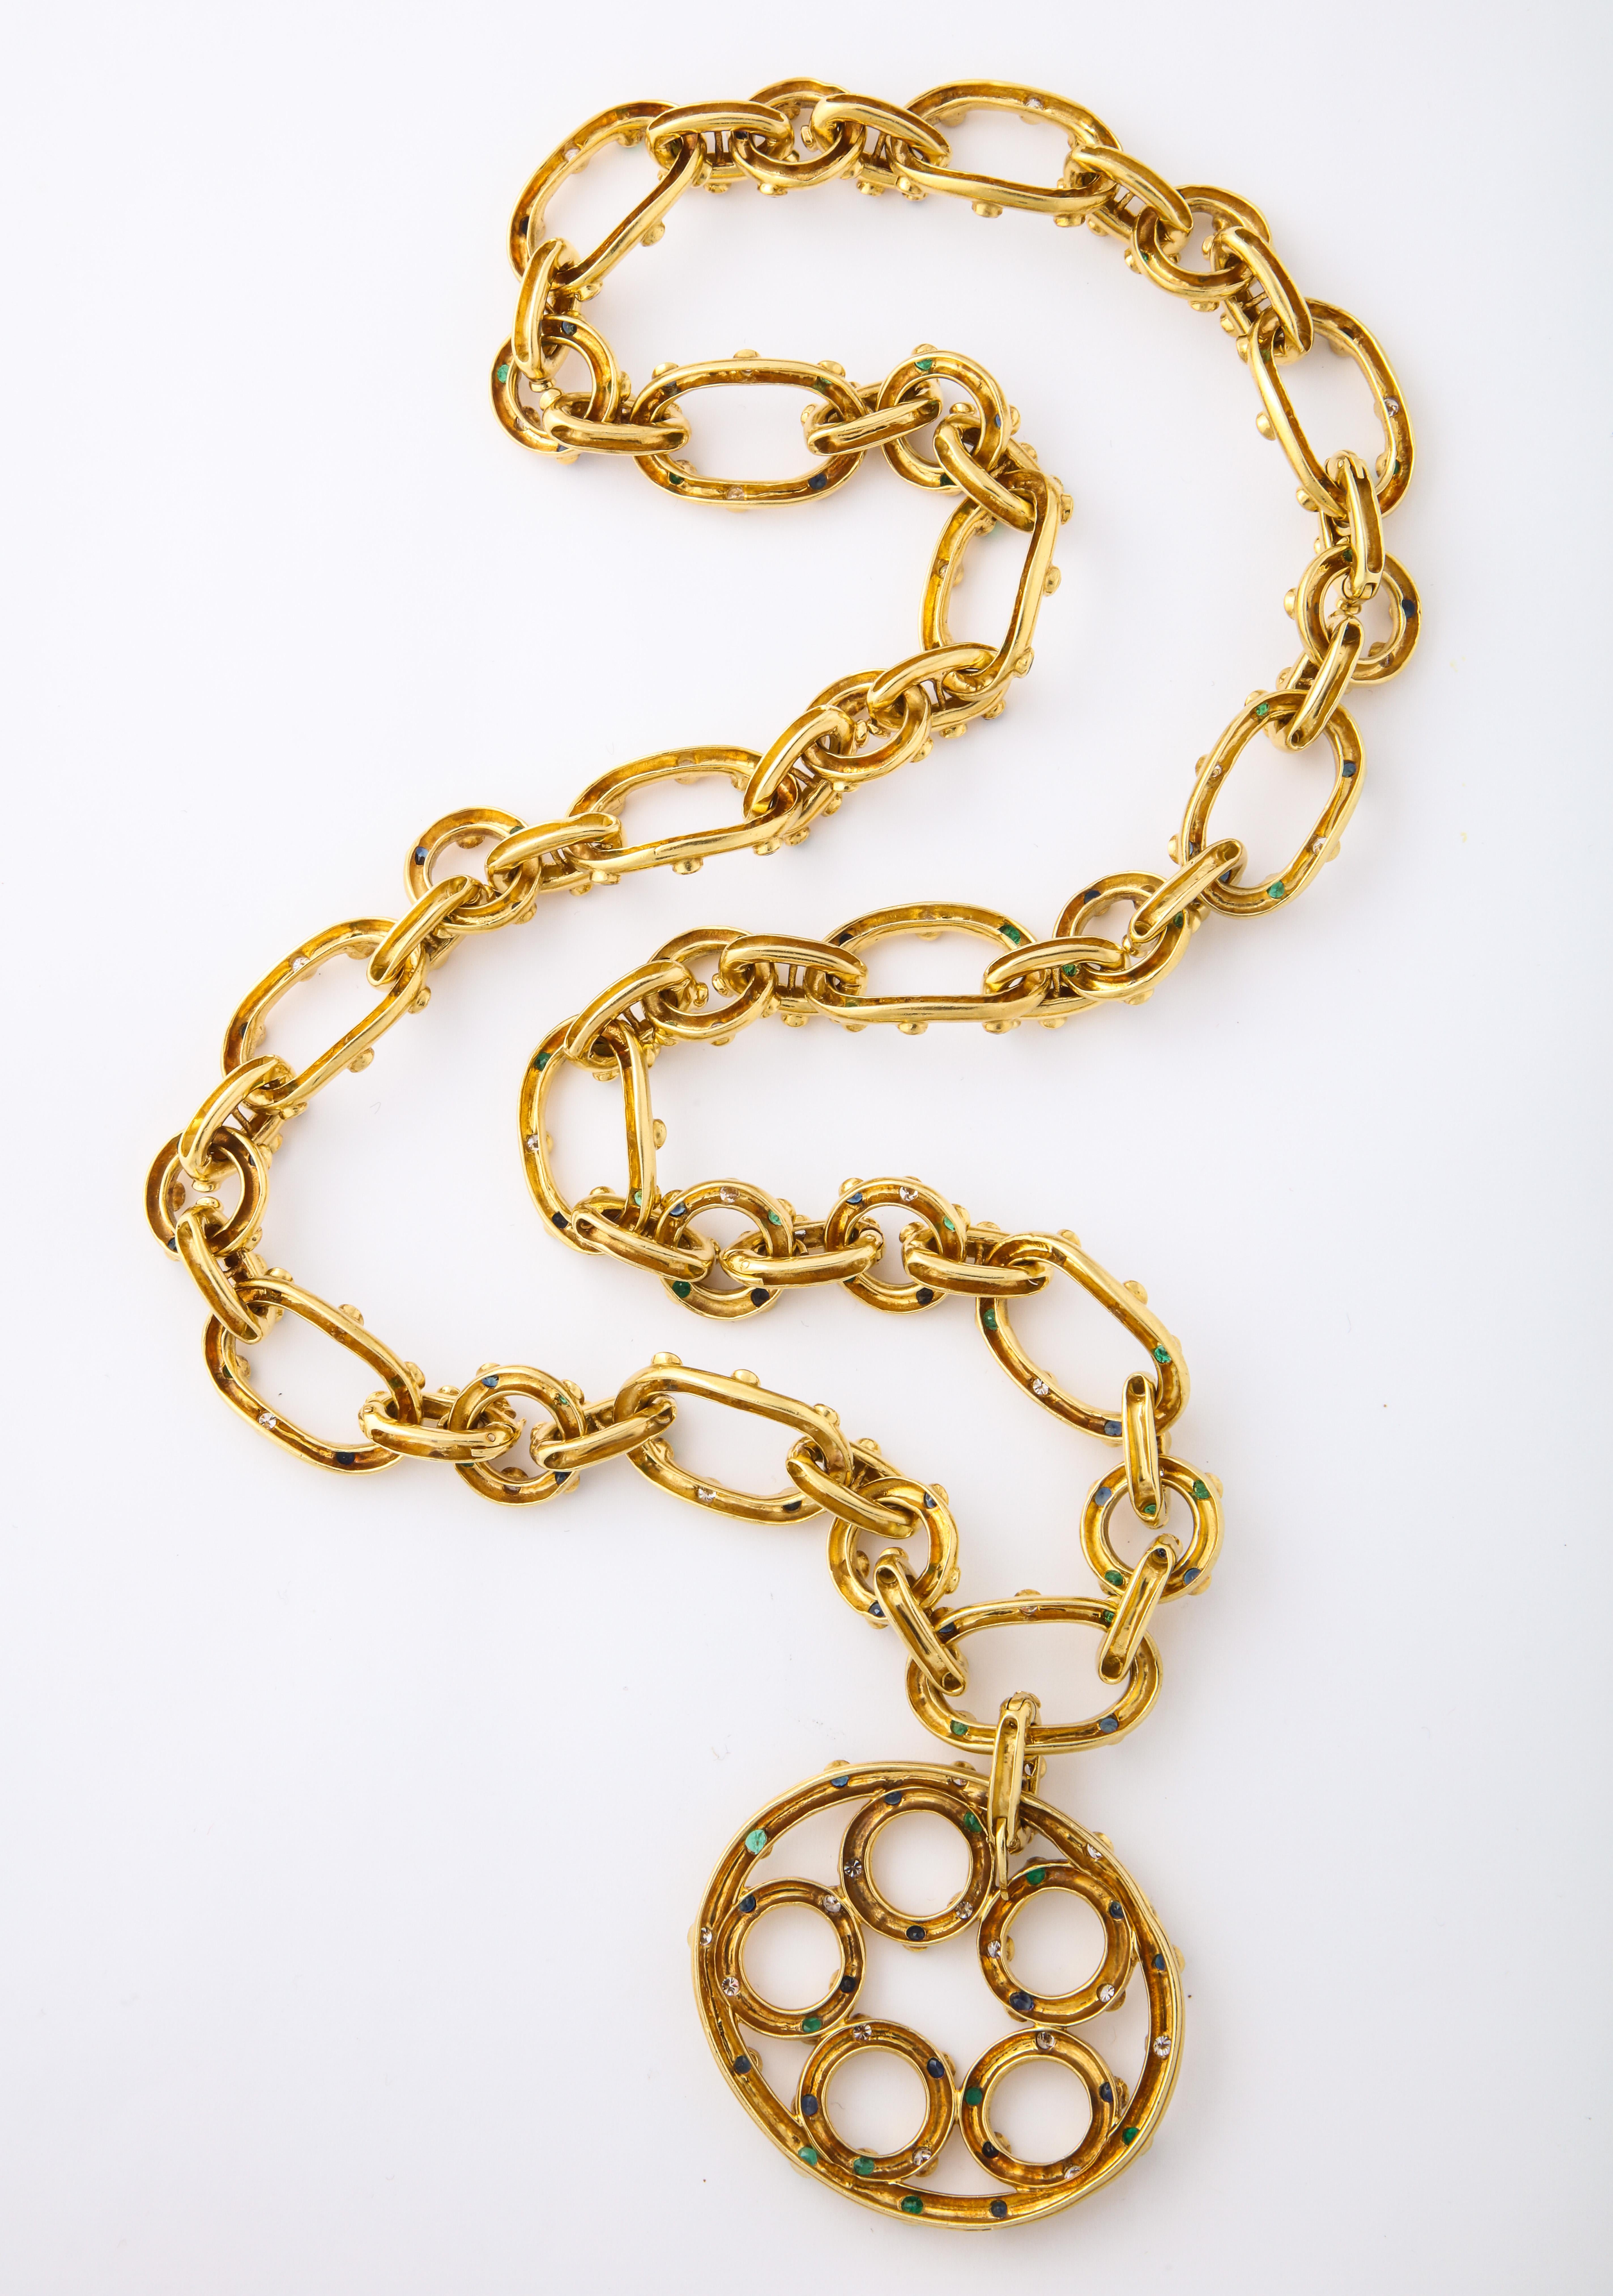 This stylish gold link necklace with a hanging pendant adorned with diamonds sapphires and emeralds.

A very chic 29 inches long

Depicted in full page spread in the 